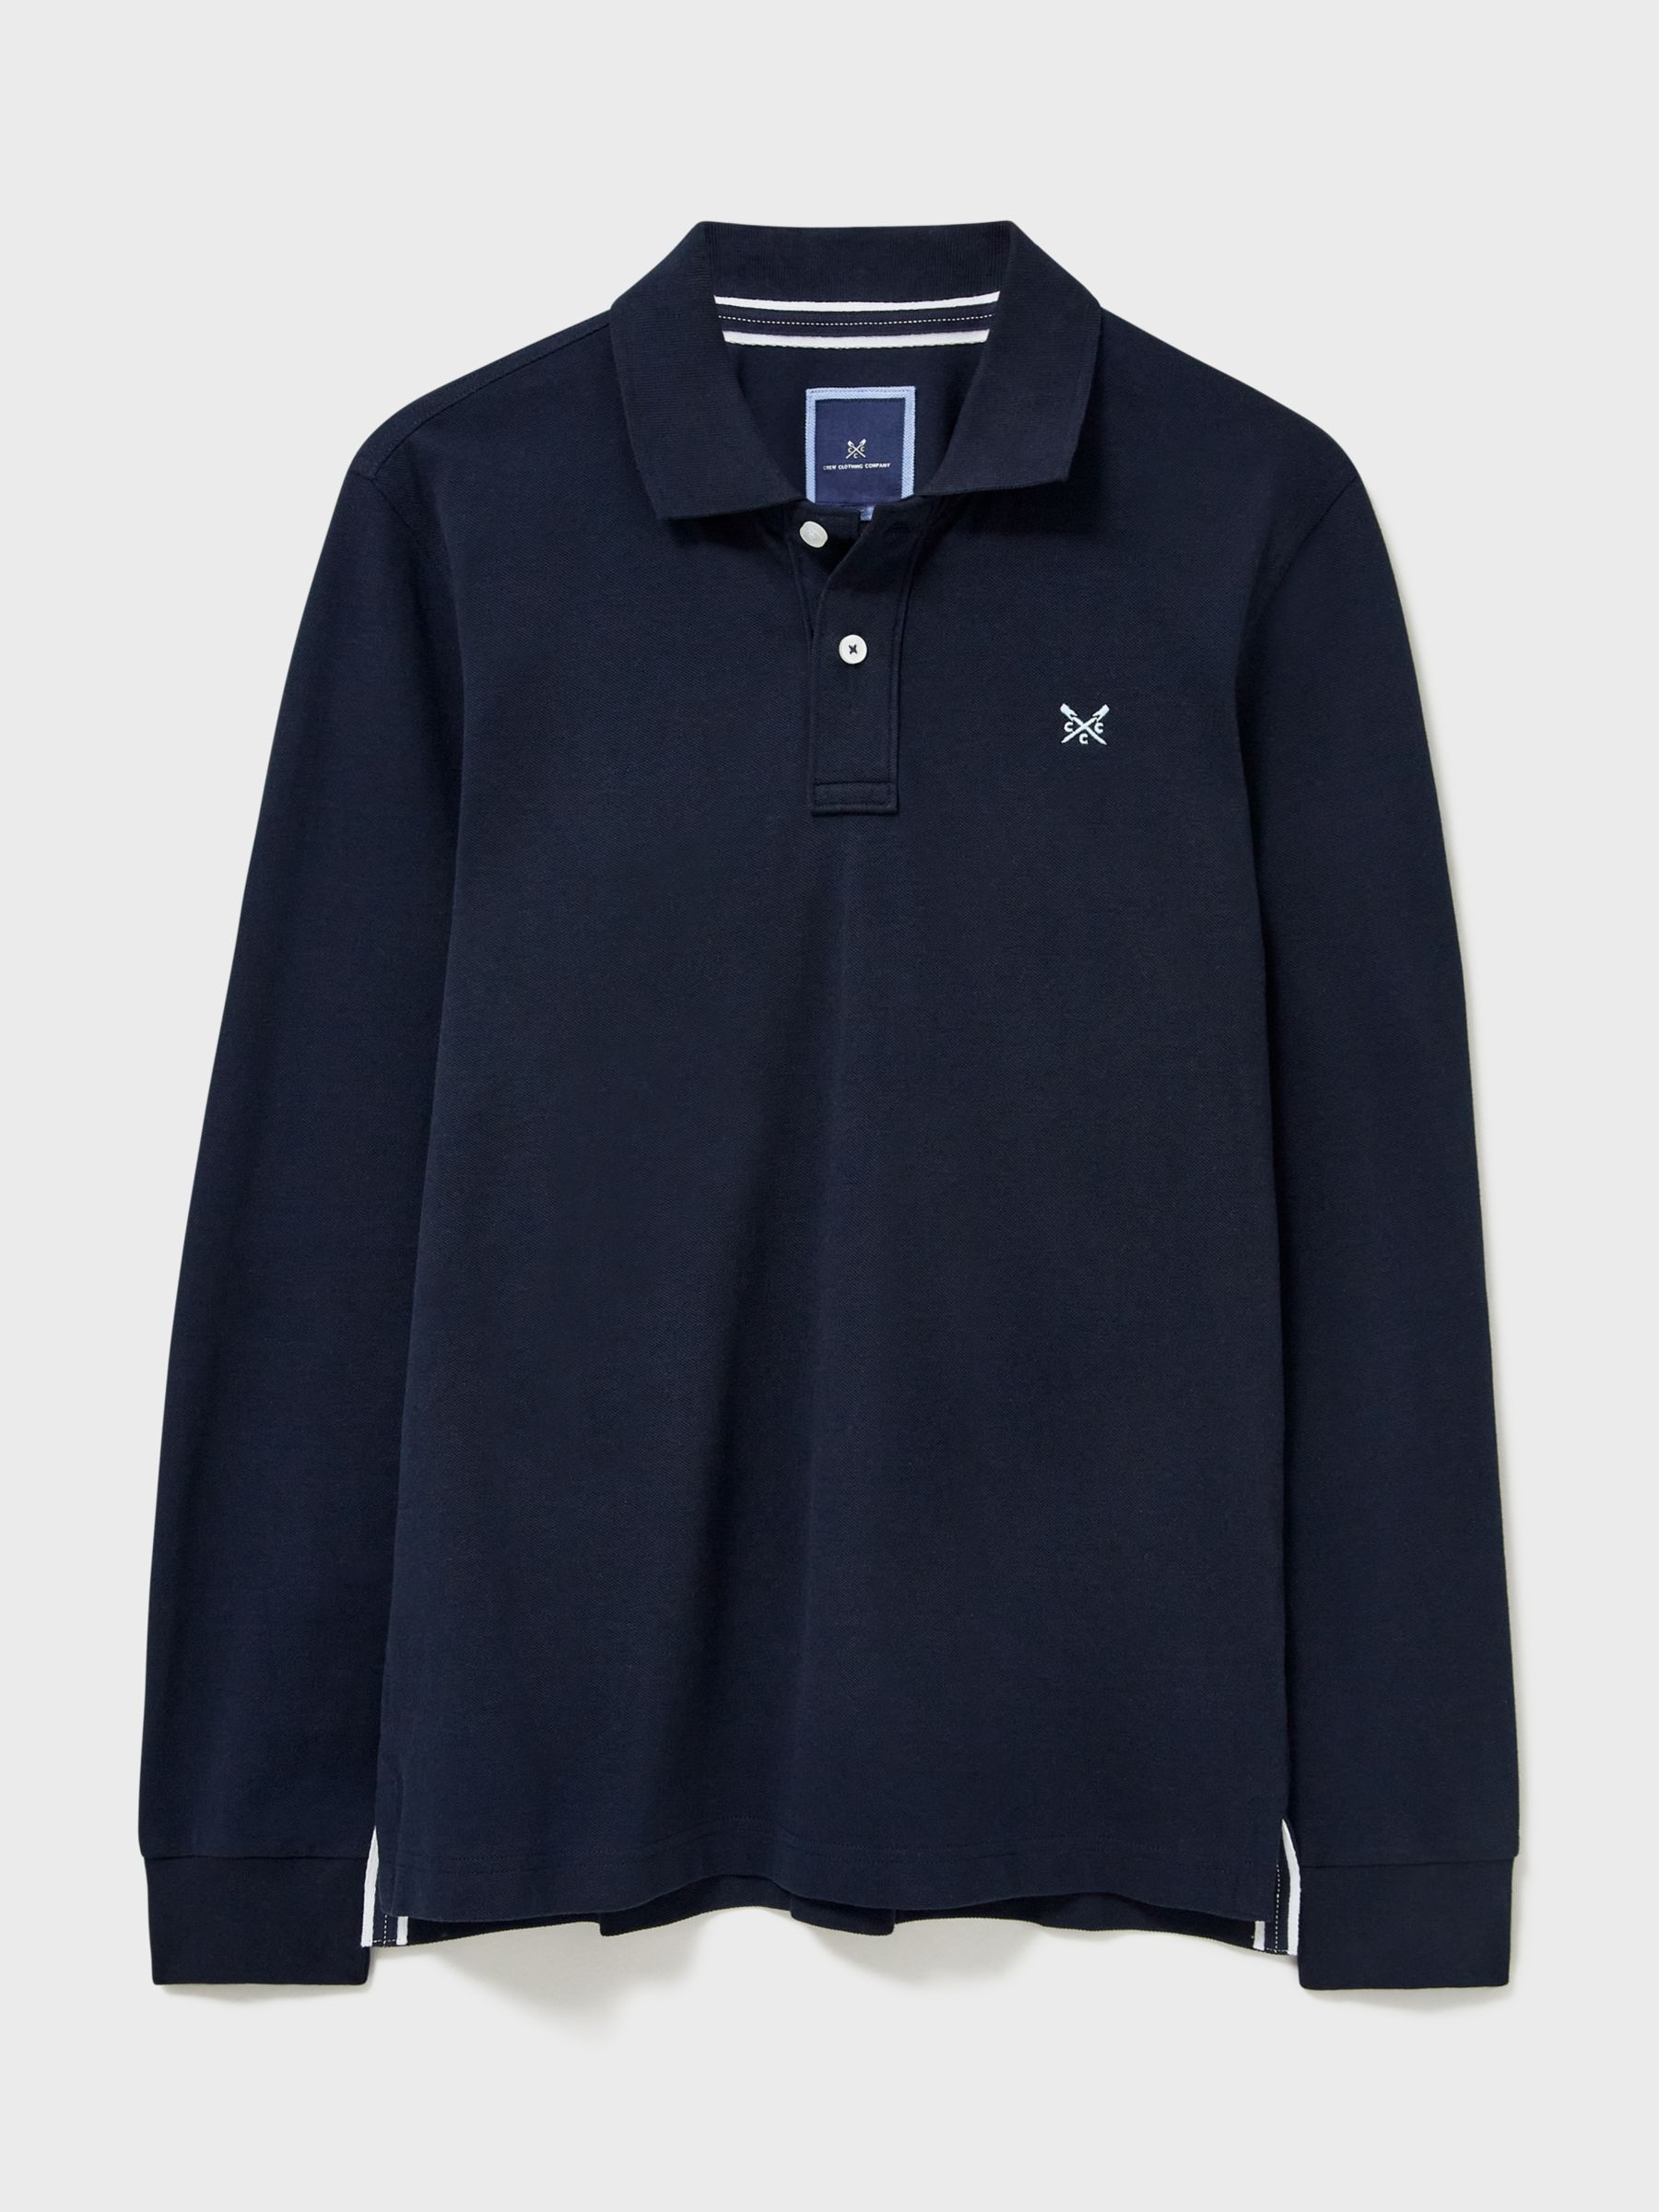 Crew Clothing Classic Polo Shirt, Navy Blue at John Lewis & Partners